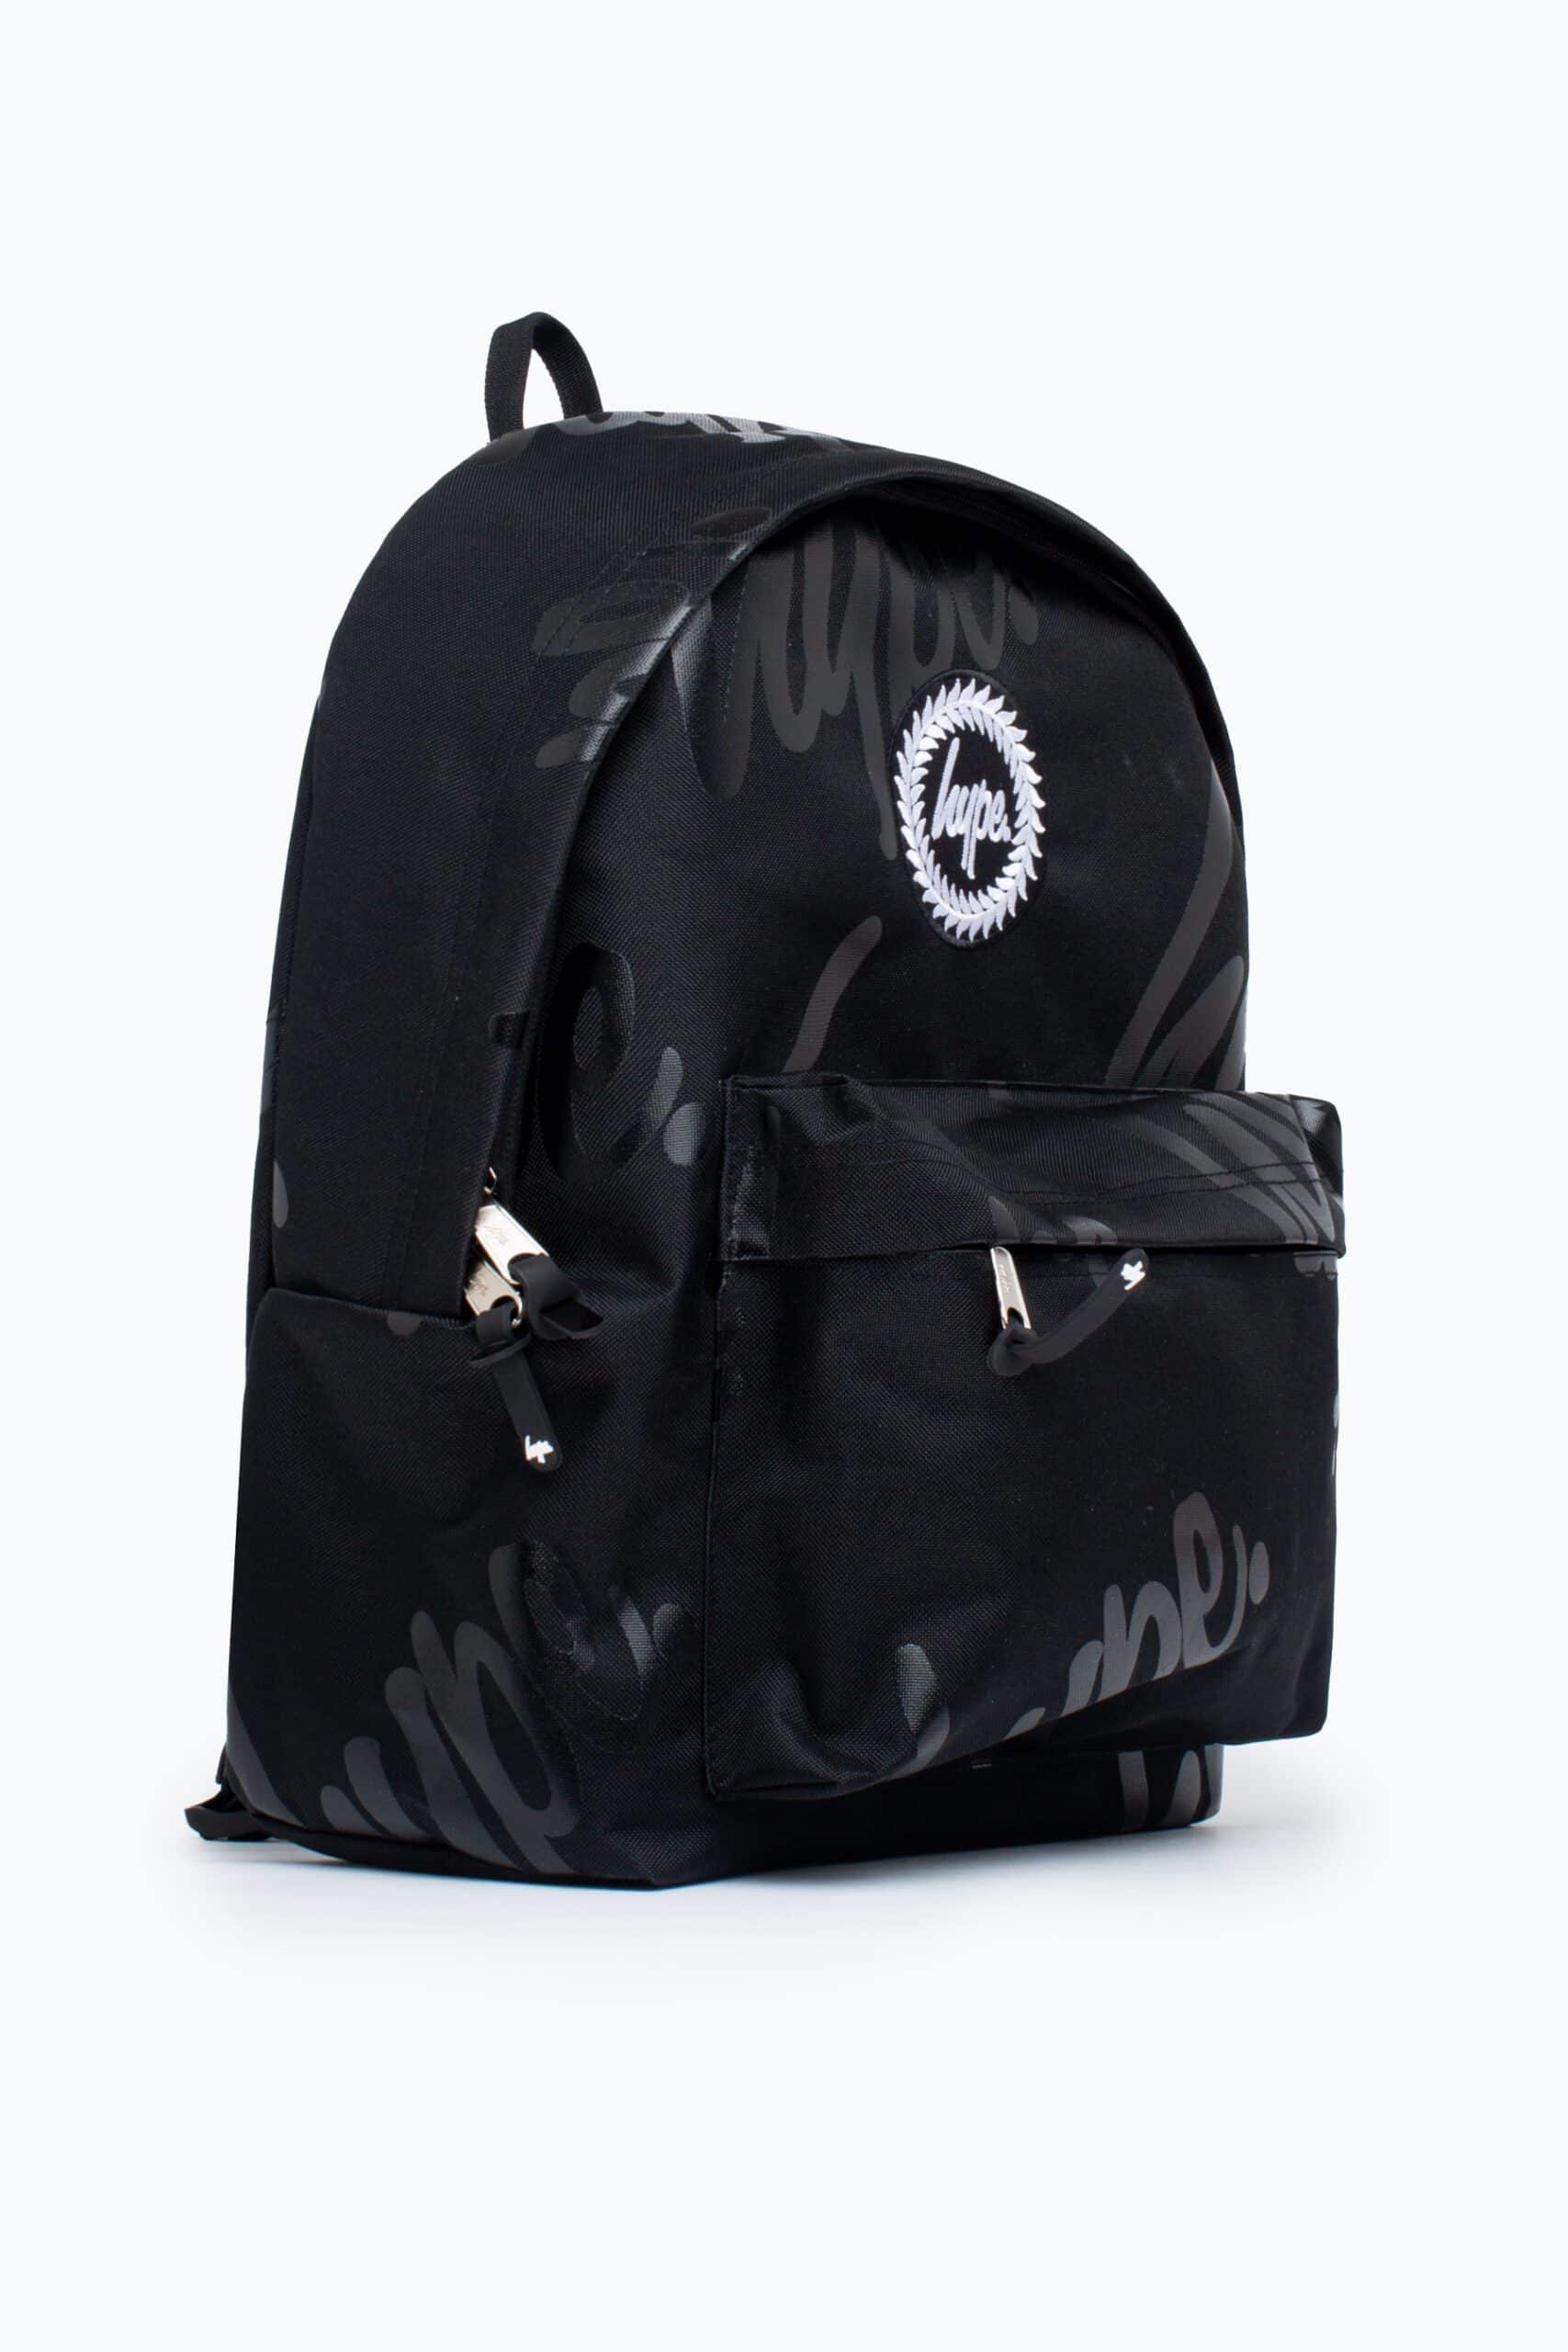 hype black backpack with multiple logos